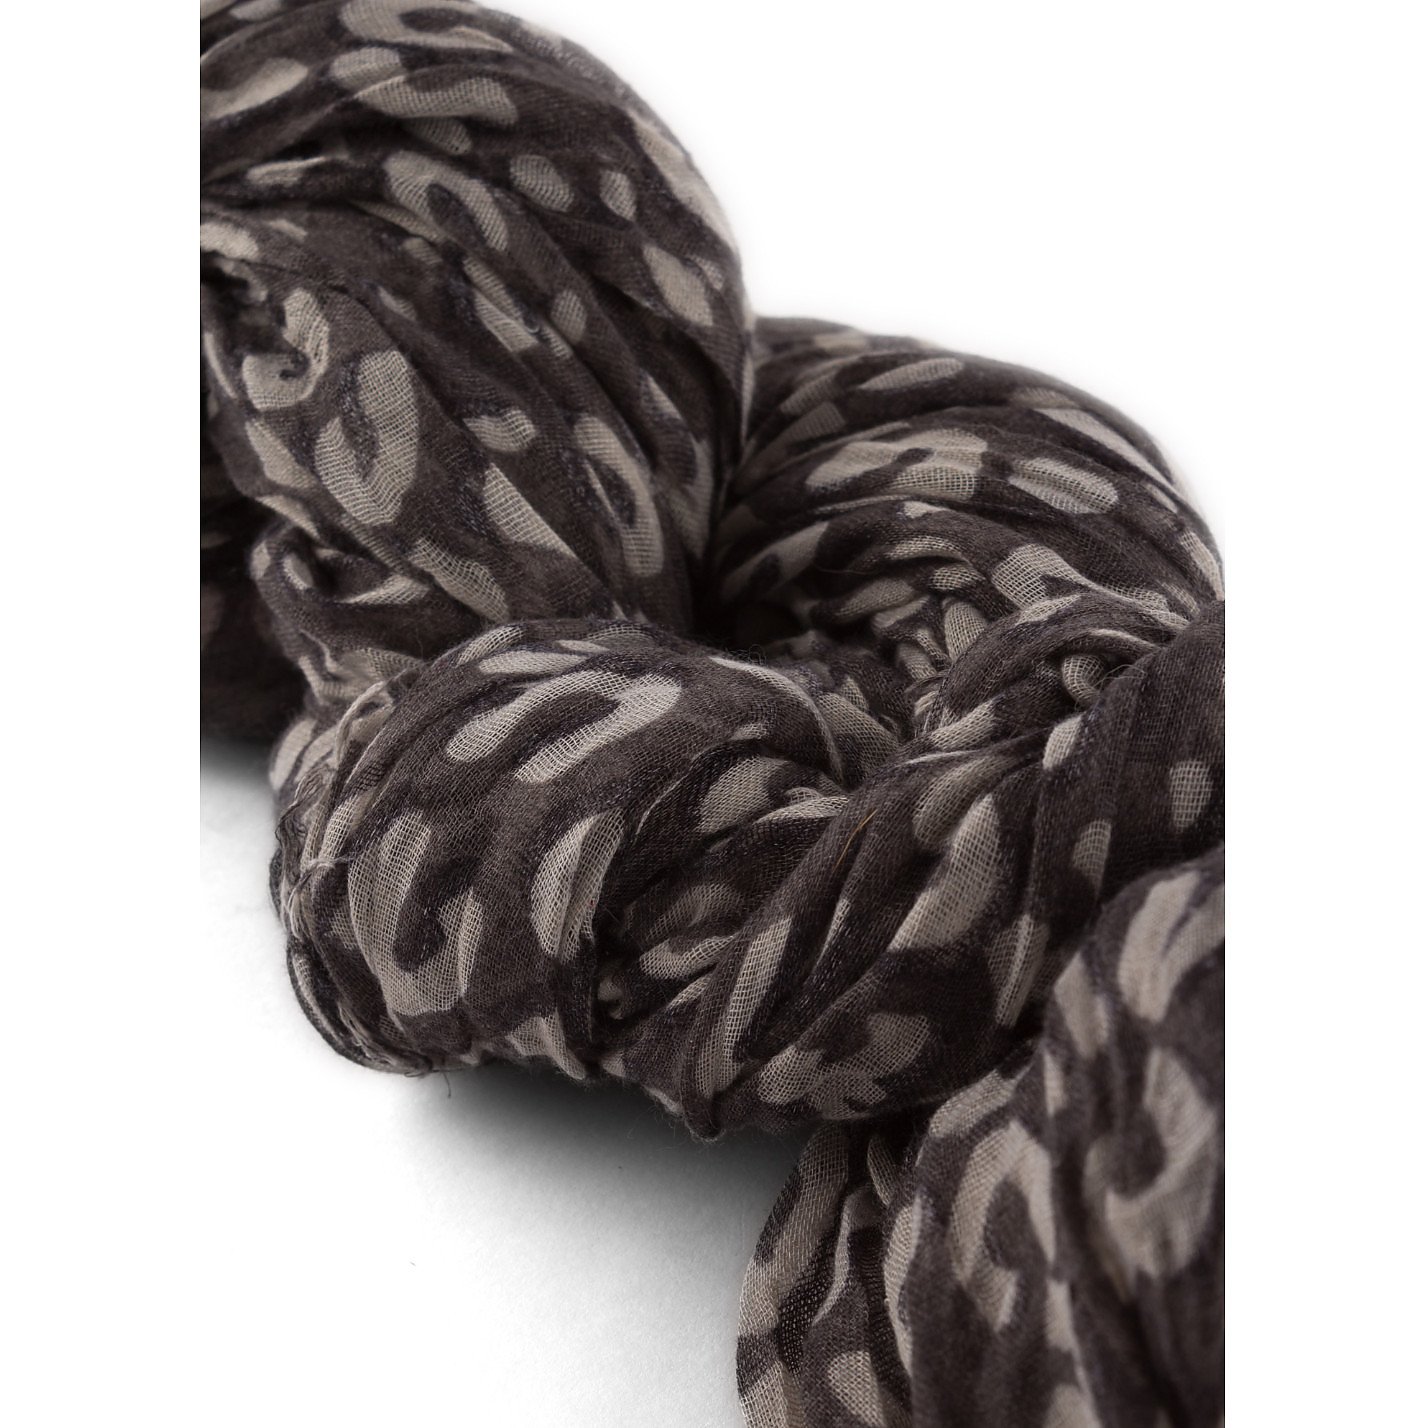 Rent or Buy Louis Vuitton Large Animal Print Scarf from www.paulmartinsmith.com